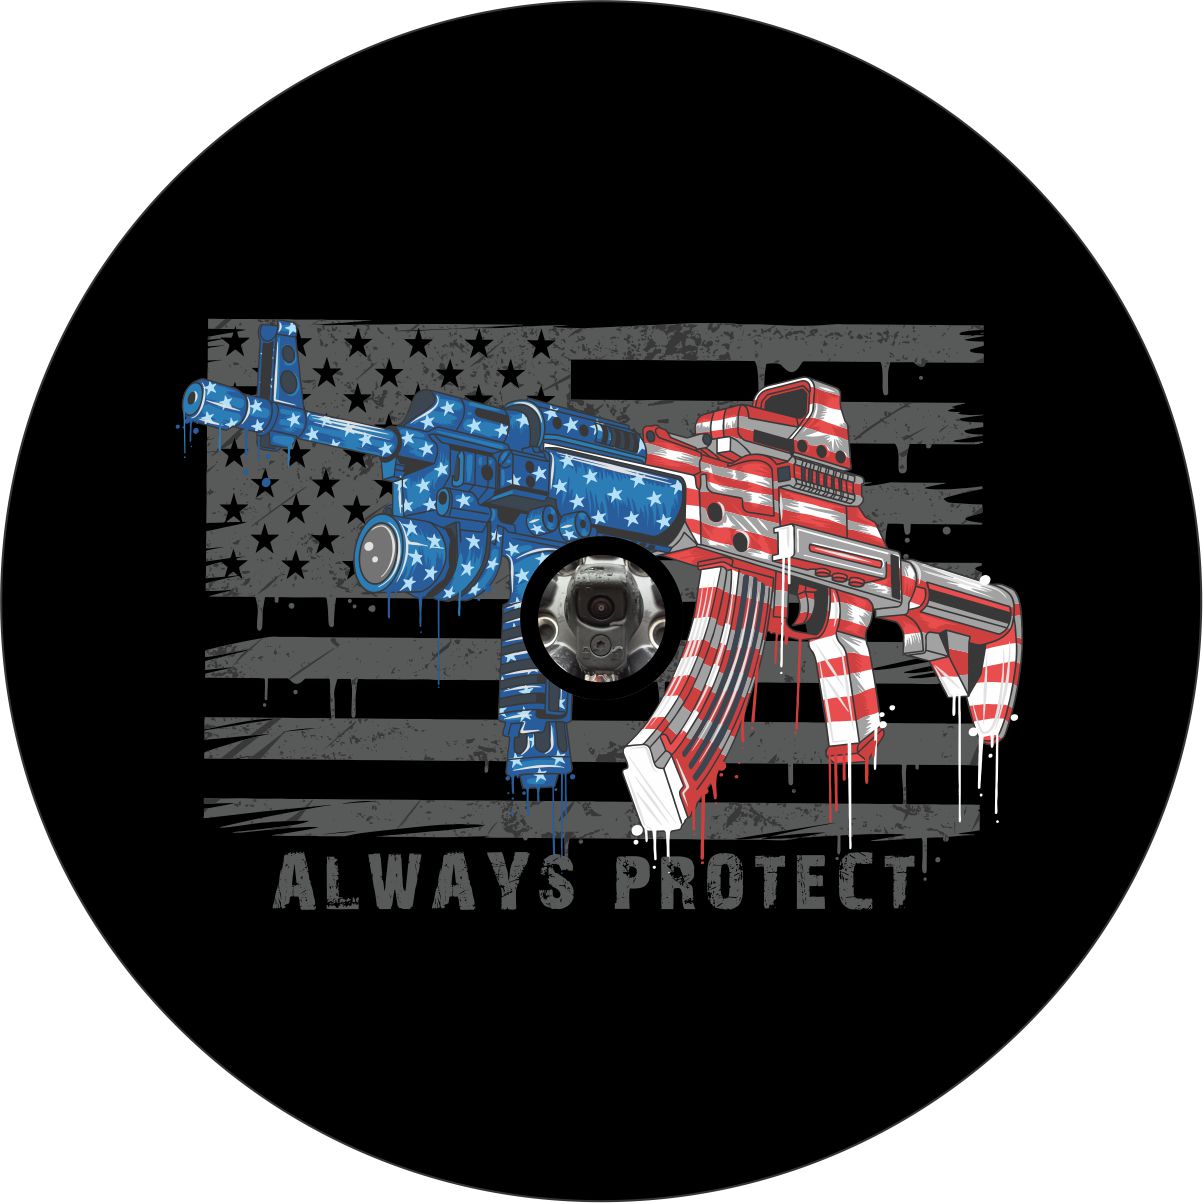 Always protect American, freedom, and 2nd amendment spare tire cover design on black vinyl for Jeep, RV, camper, Bronco, and more designed with a hole for a back up camera